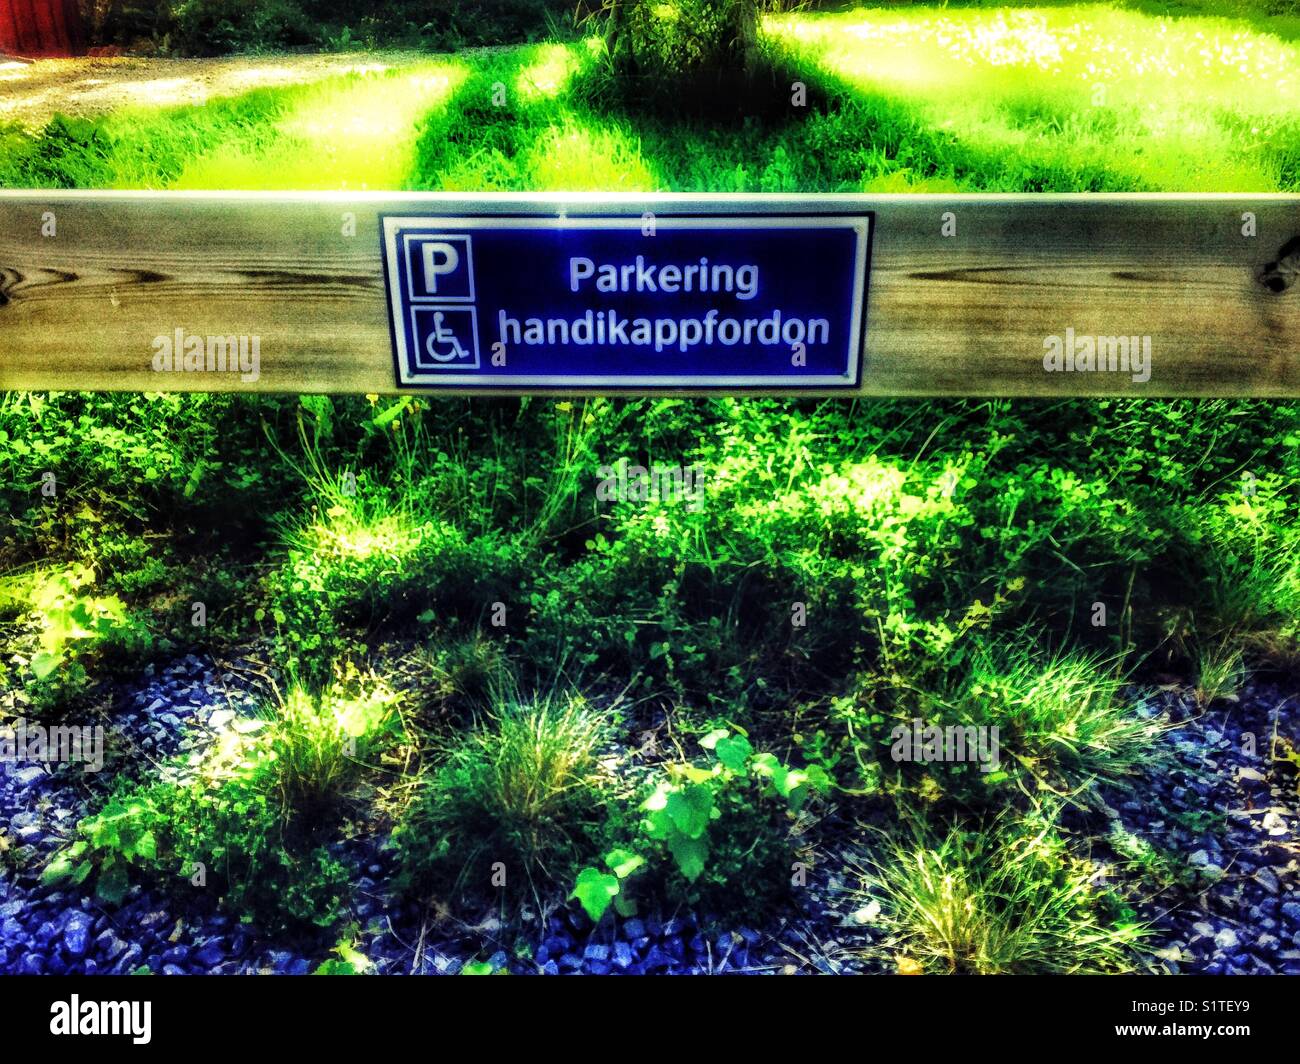 Disabled parking space, Sweden Stock Photo